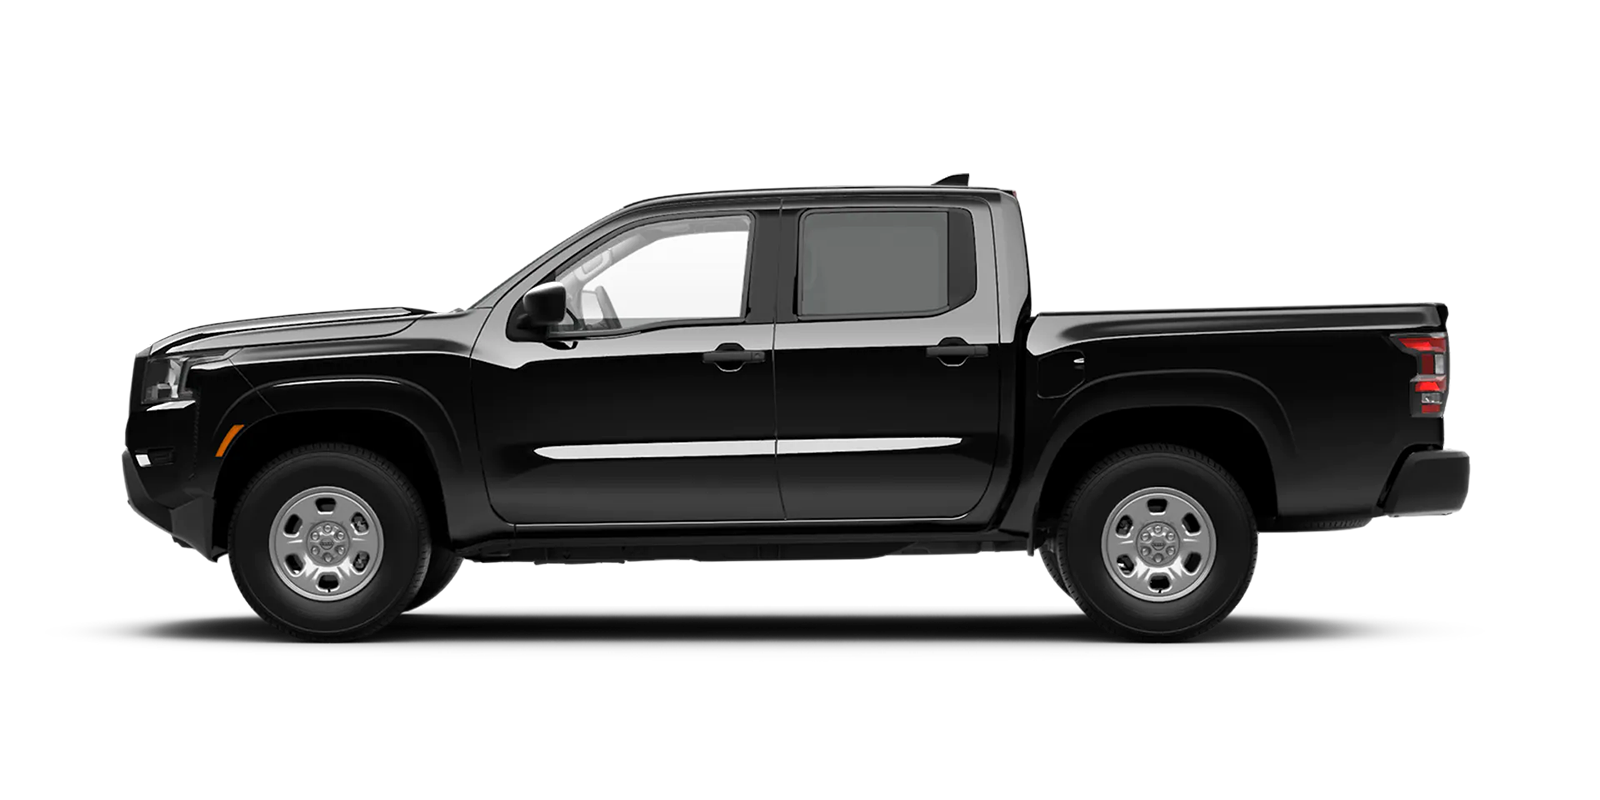 2022 Frontier Crew Cab S 4x2 in Super Black | Fort Collins Nissan in Fort Collins CO